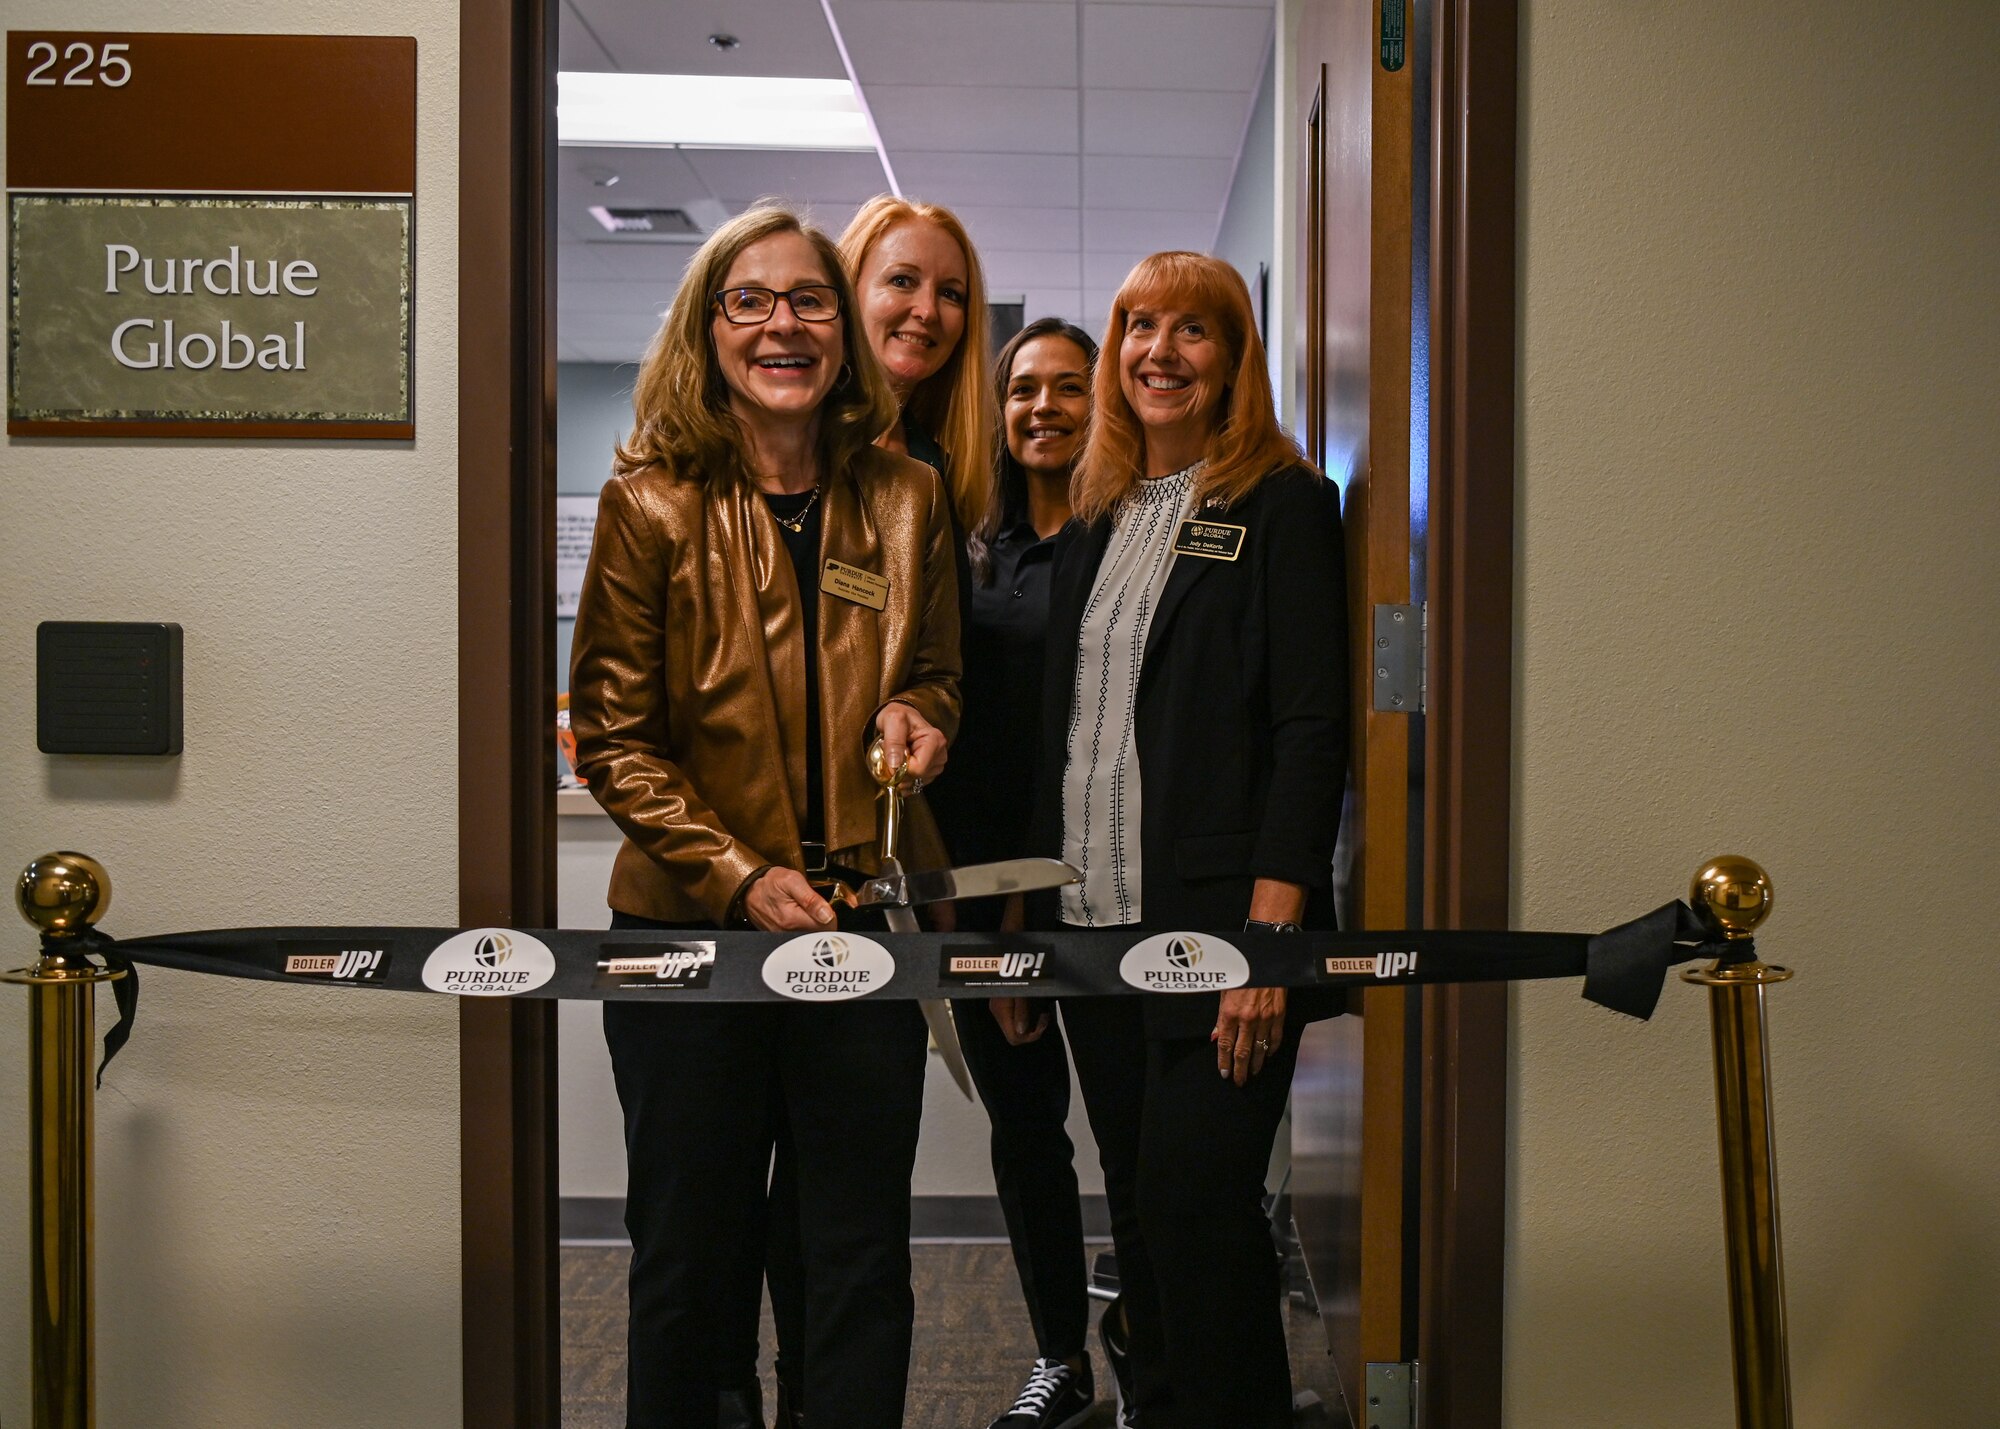 A college vice president, associate vice president and dean pose for a photo as they prepare to cut a ribbon during an education center open house.